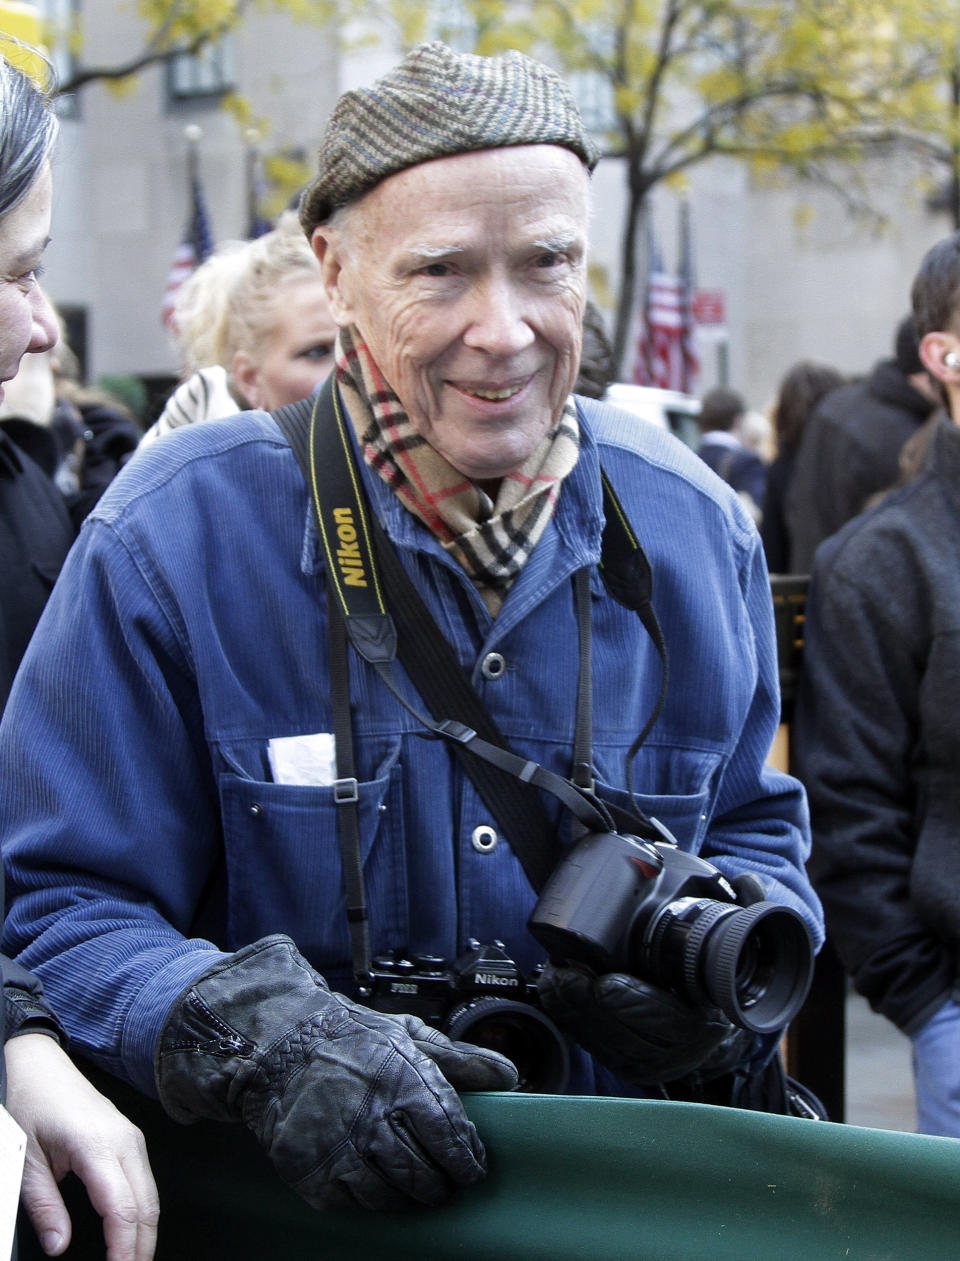 In this Nov. 11, 2011 file photo, New York Times photographer Bill Cunningham waits for the arrival of the annual Rockefeller Center Christmas tree, in New York. Cunningham’s project of 88 prints, “Facades,” is being featured in an exhibition at the New-York Historical Society, running through June 15, 2014. Long before his images of street fashion became a regular newspaper feature, Cunningham spent eight years, from 1968 to 1976, working on the whimsical photo essay of models in period costumes posing against historic sites of the same vintage. (AP Photo/Richard Drew, File)